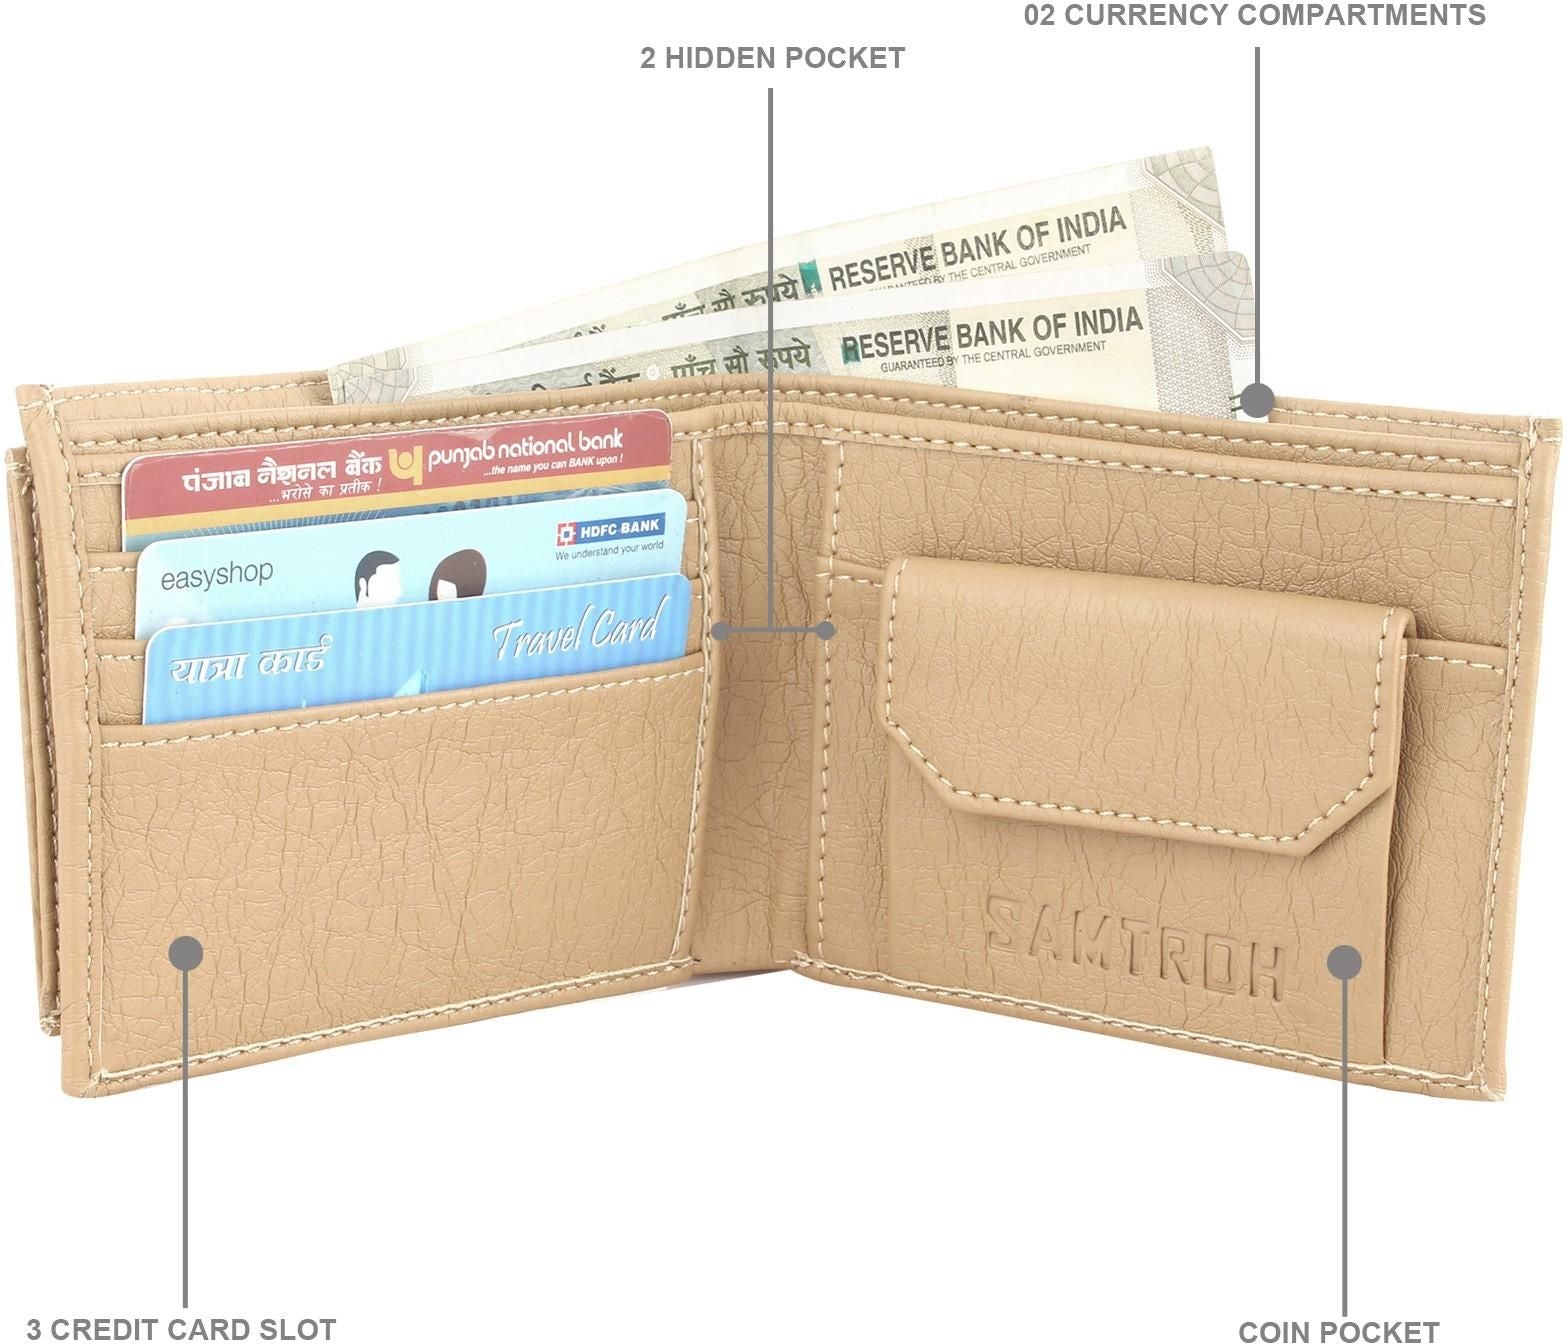 SAMTROH Men Casual Beige Artificial Leather Wallet (8 Card Slots)